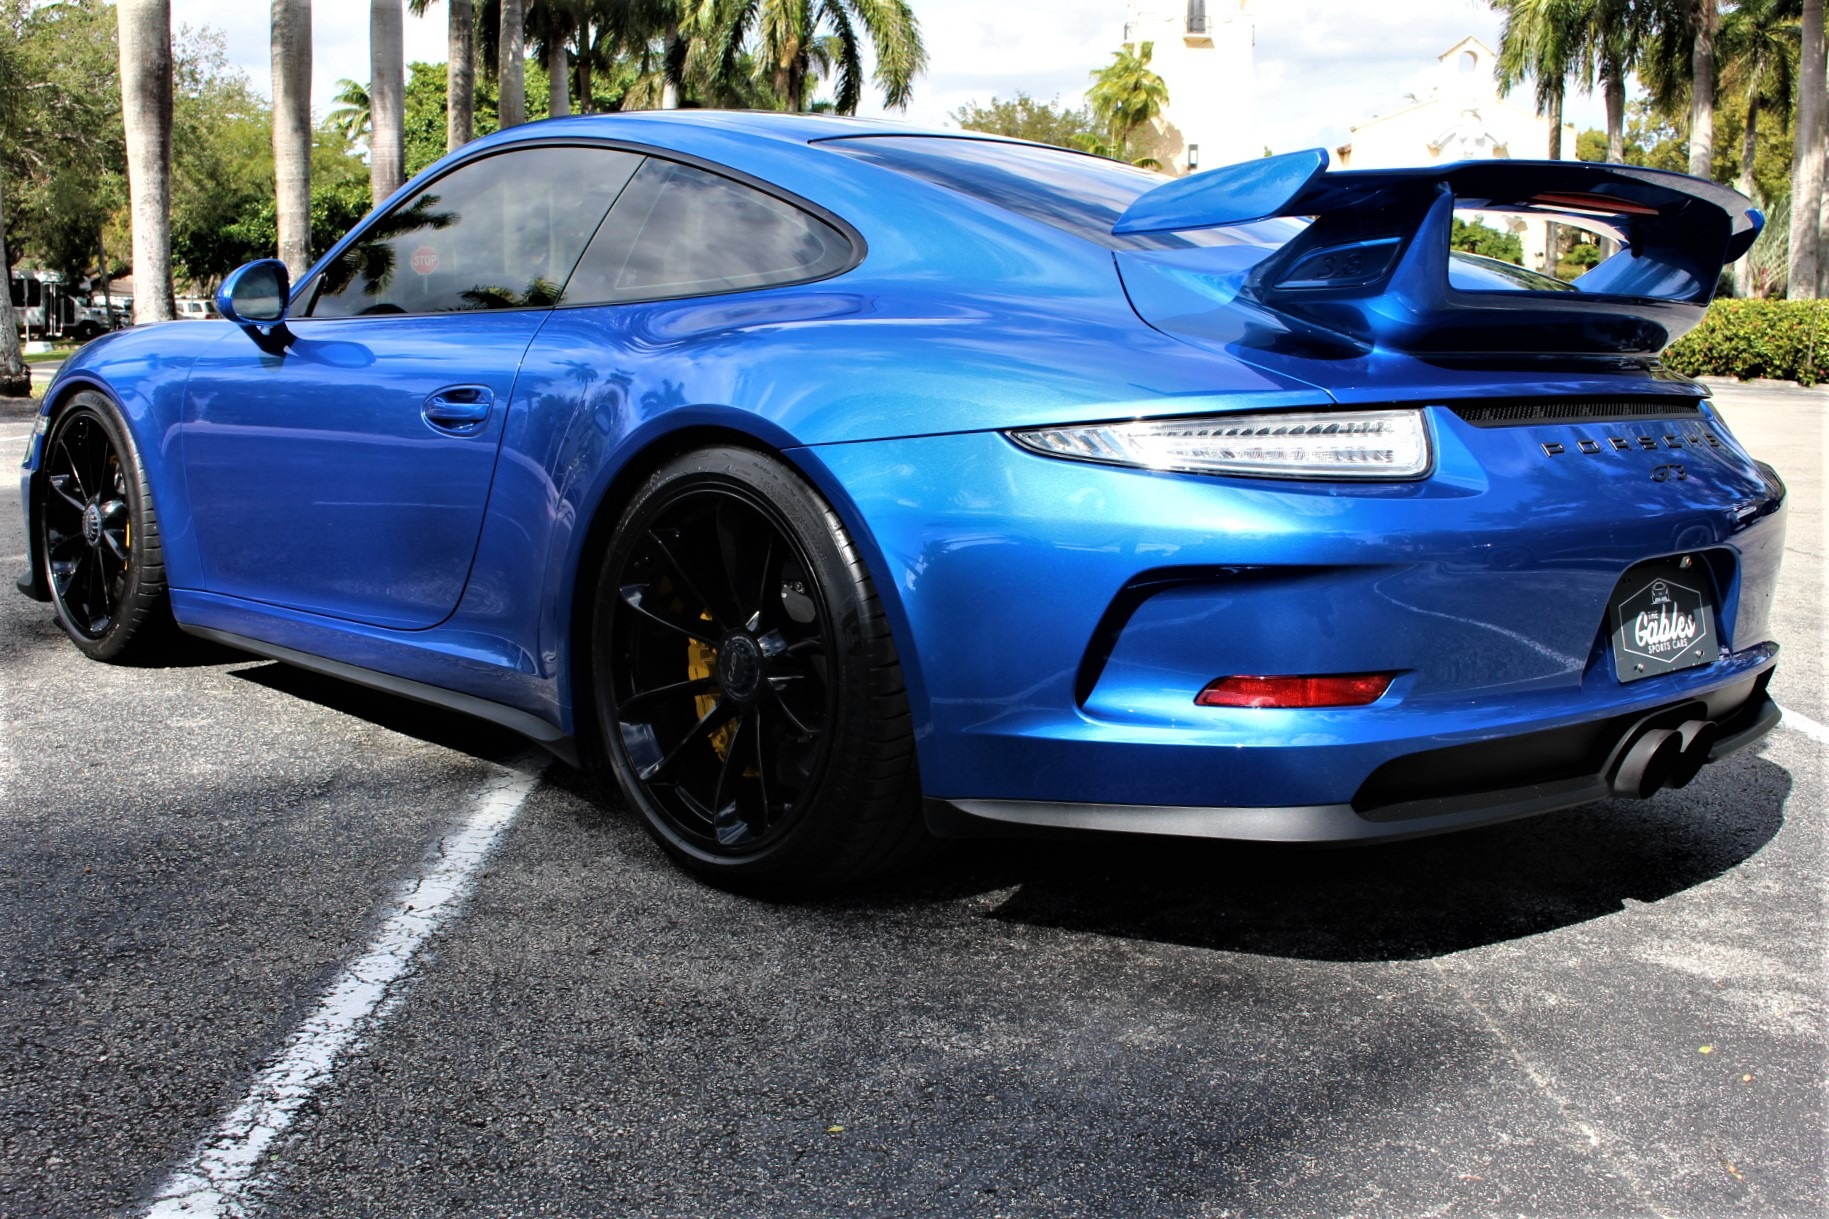 Used 2014 Porsche 911 GT3 for sale Sold at The Gables Sports Cars in Miami FL 33146 4